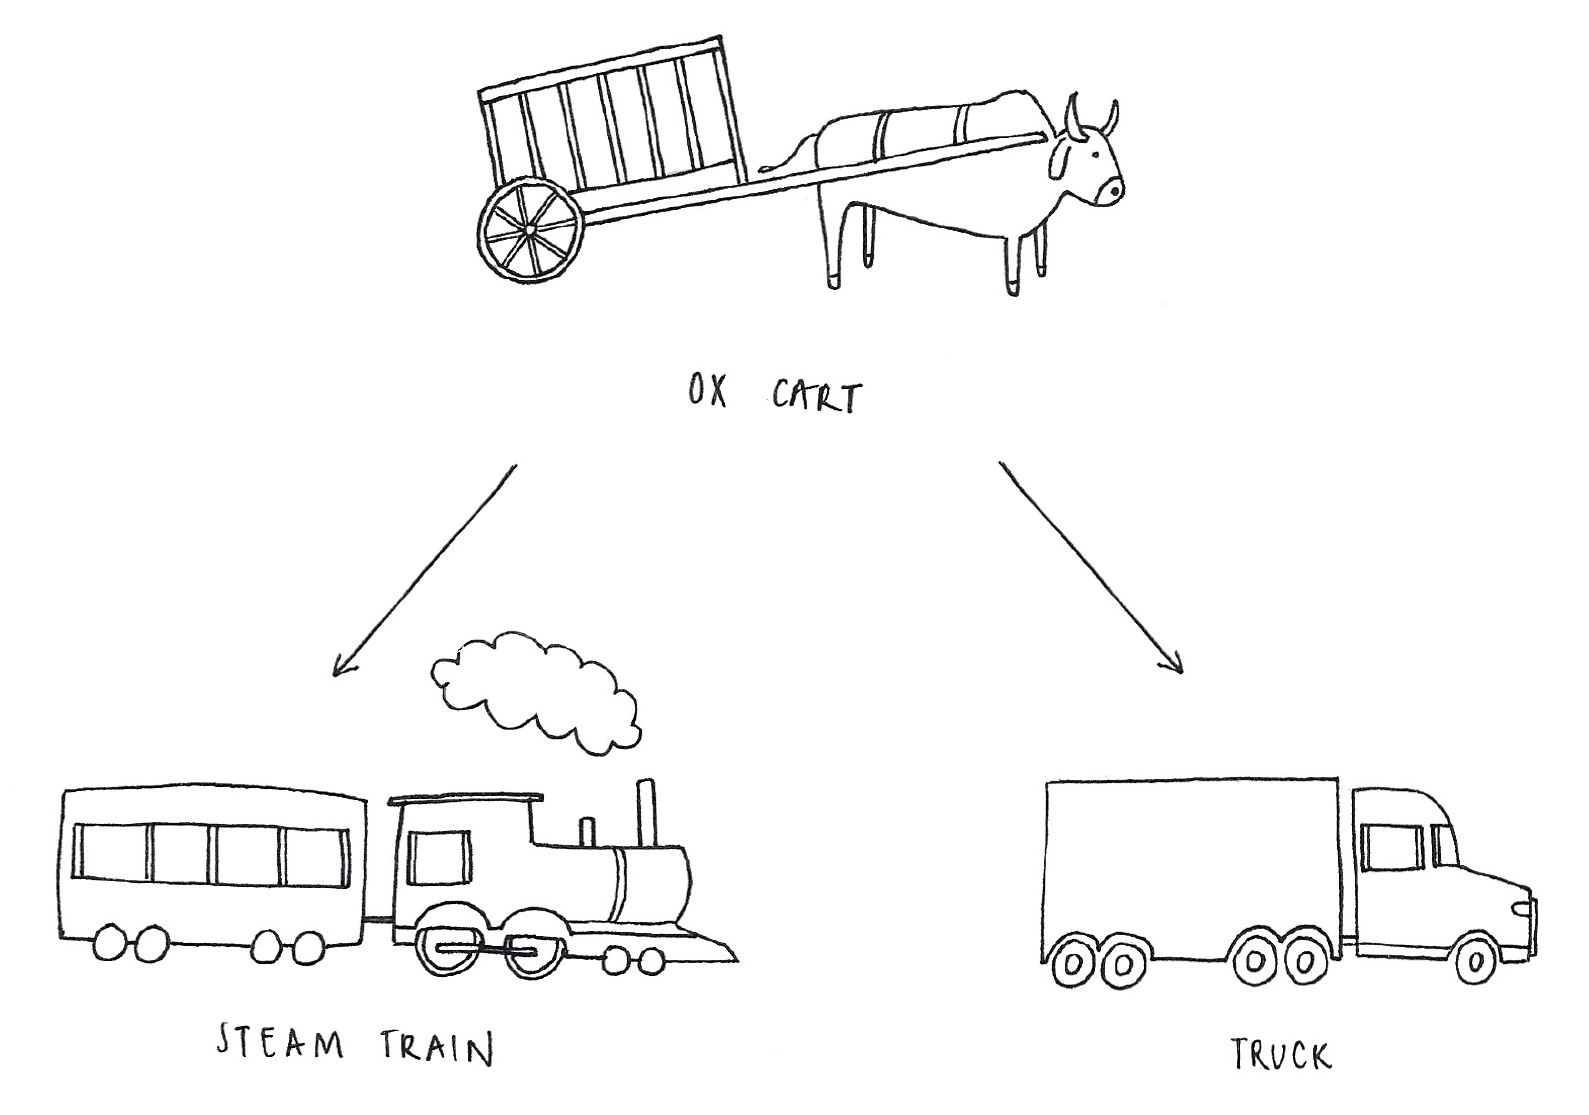 Hand-drawn illustration of an ox cart, with arrows indicating its improvement into a steam engine and a truck.